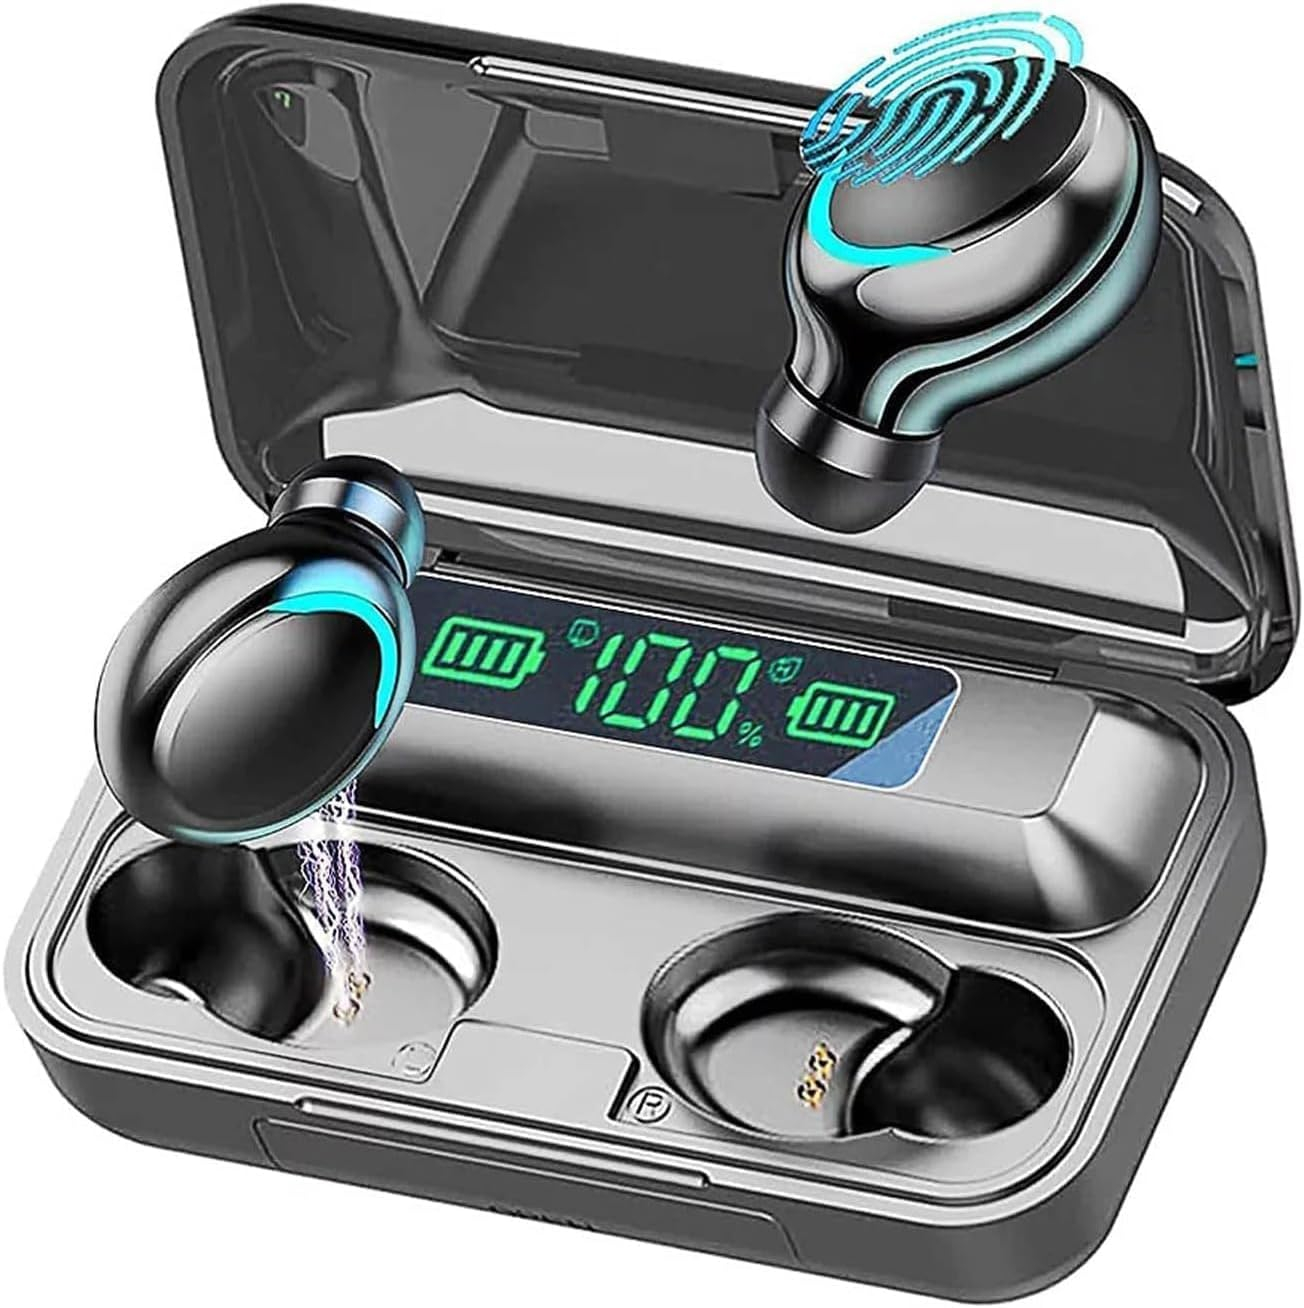 BMHOLU Wireless Earbuds with Large Charging Case and Phone Charging Function, IPX5 Waterproof, Hi-Fi Stereo Sound, Touch Control, for iOS/Android - Perfect for Active Lifestyle